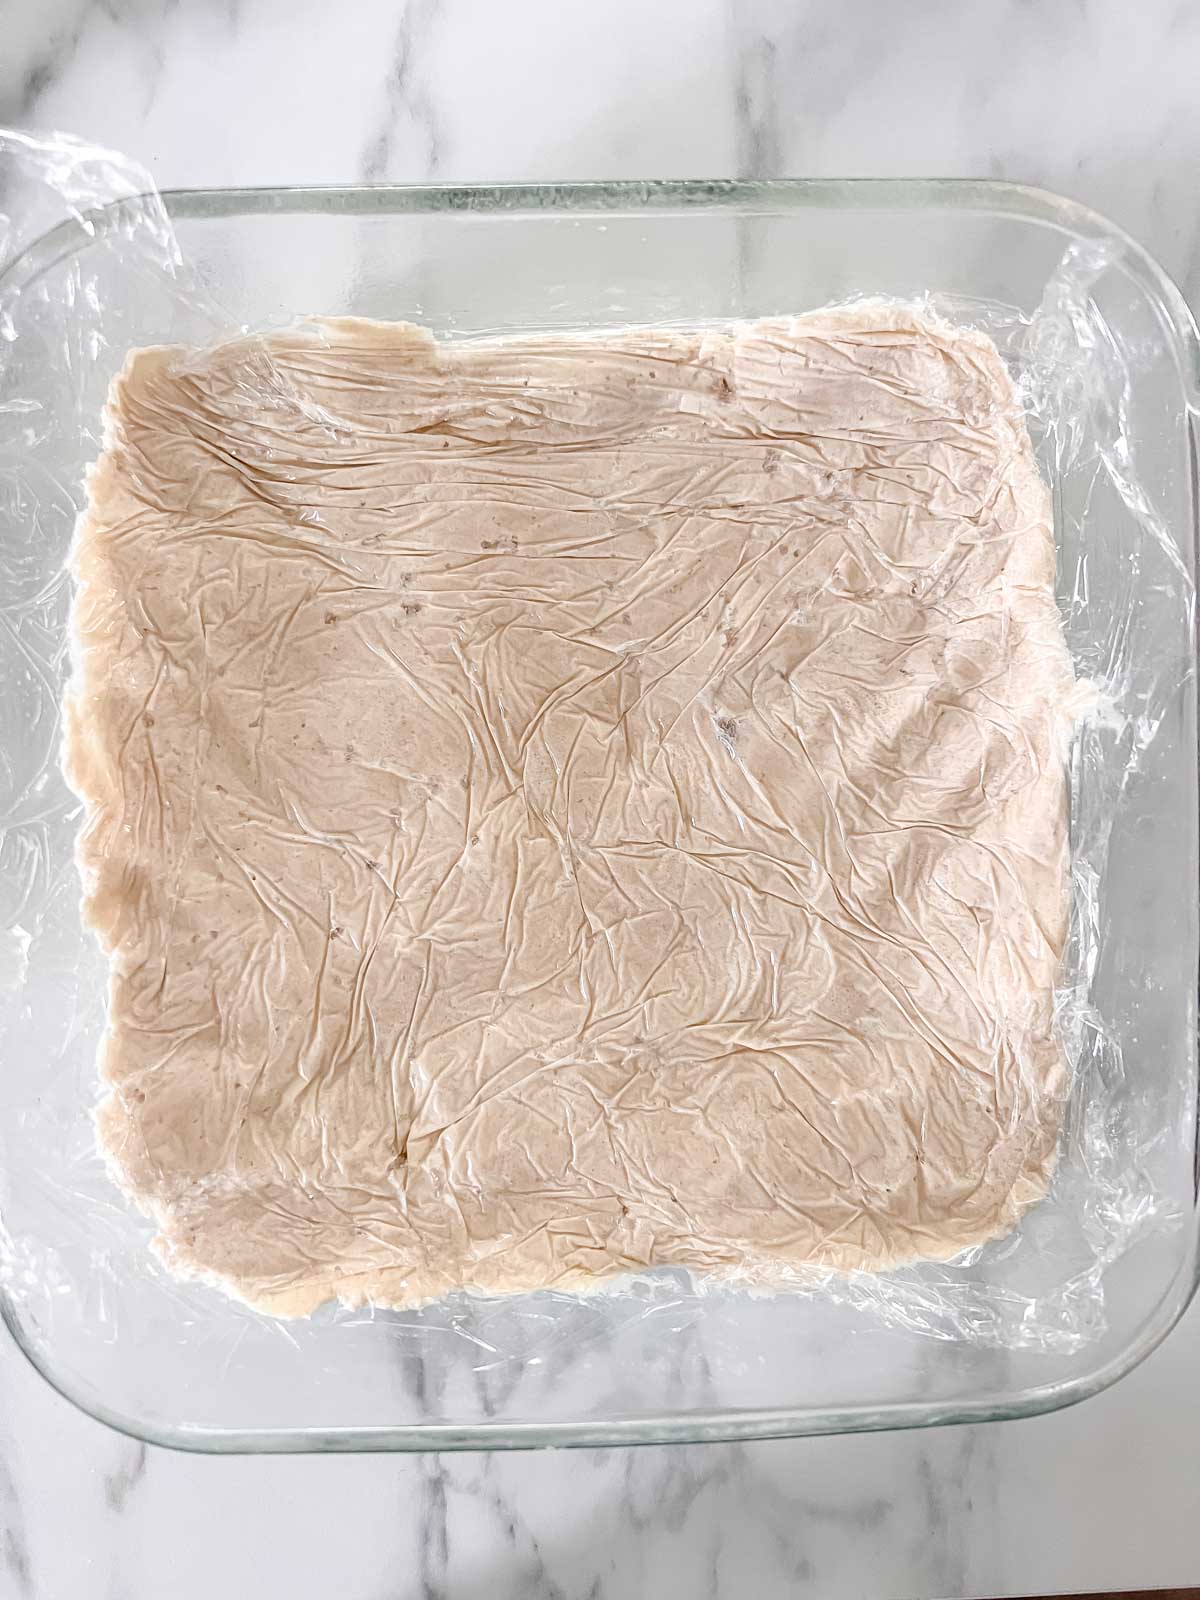 An 8x8 glass pan with half the dough pressed in it with plastic wrap over it. 